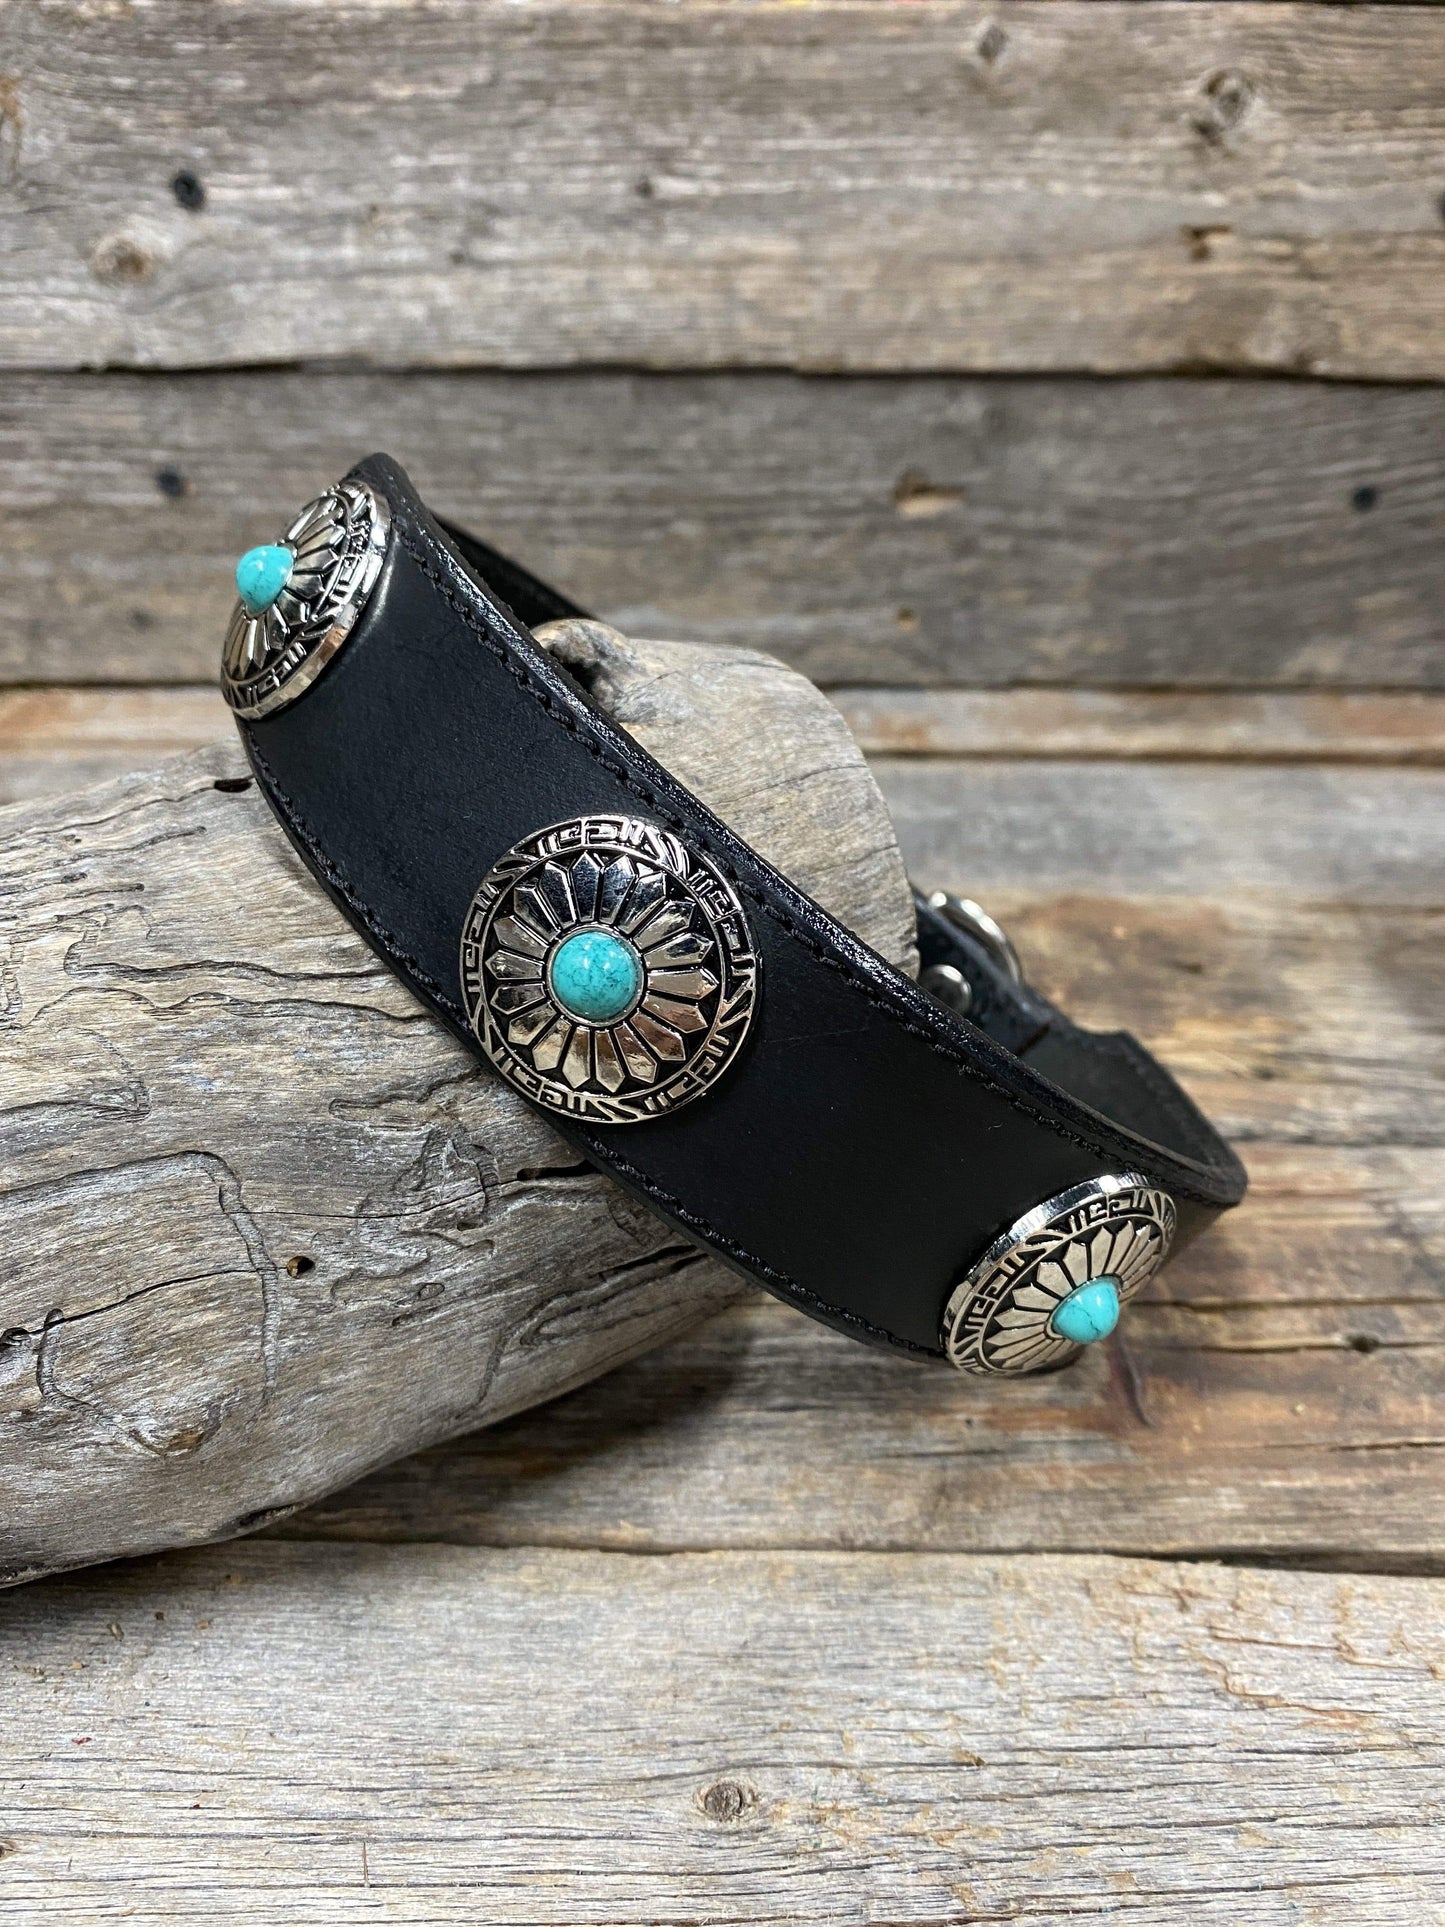 Designer Dog Collars SMALL / TURQUOISE Black Leather Dog Collar Sizes Small - Medium - Flower Conchos LL#402 LL401SMGR